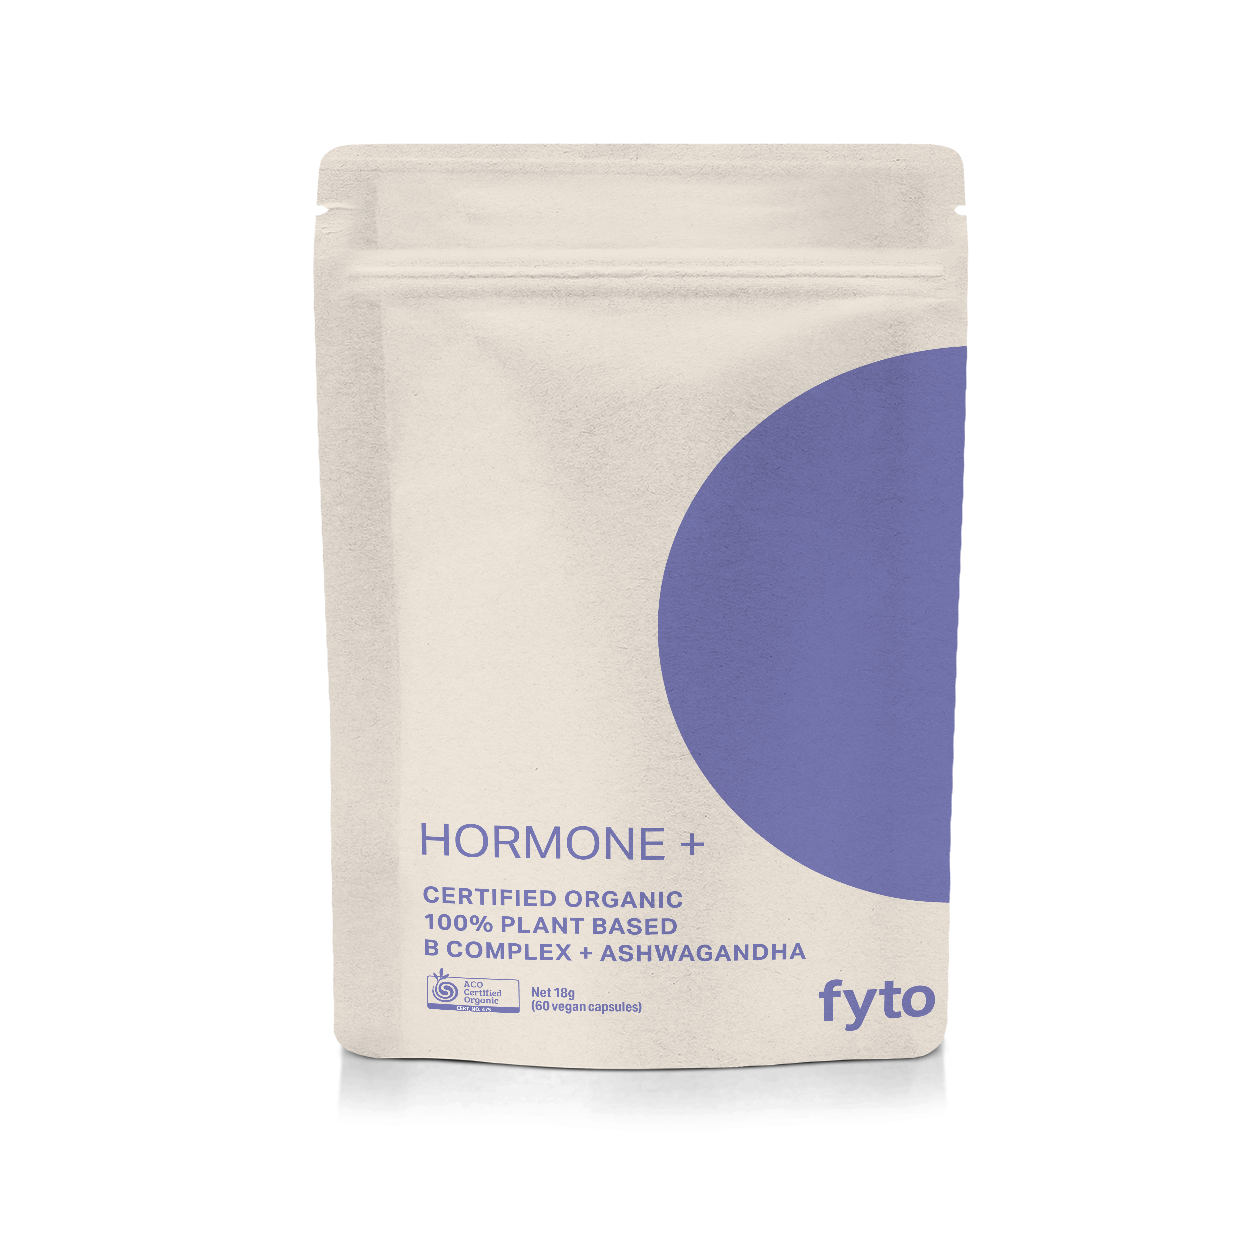 Fyto Hormone + Certified Organic 100% Plant based 60 capsules